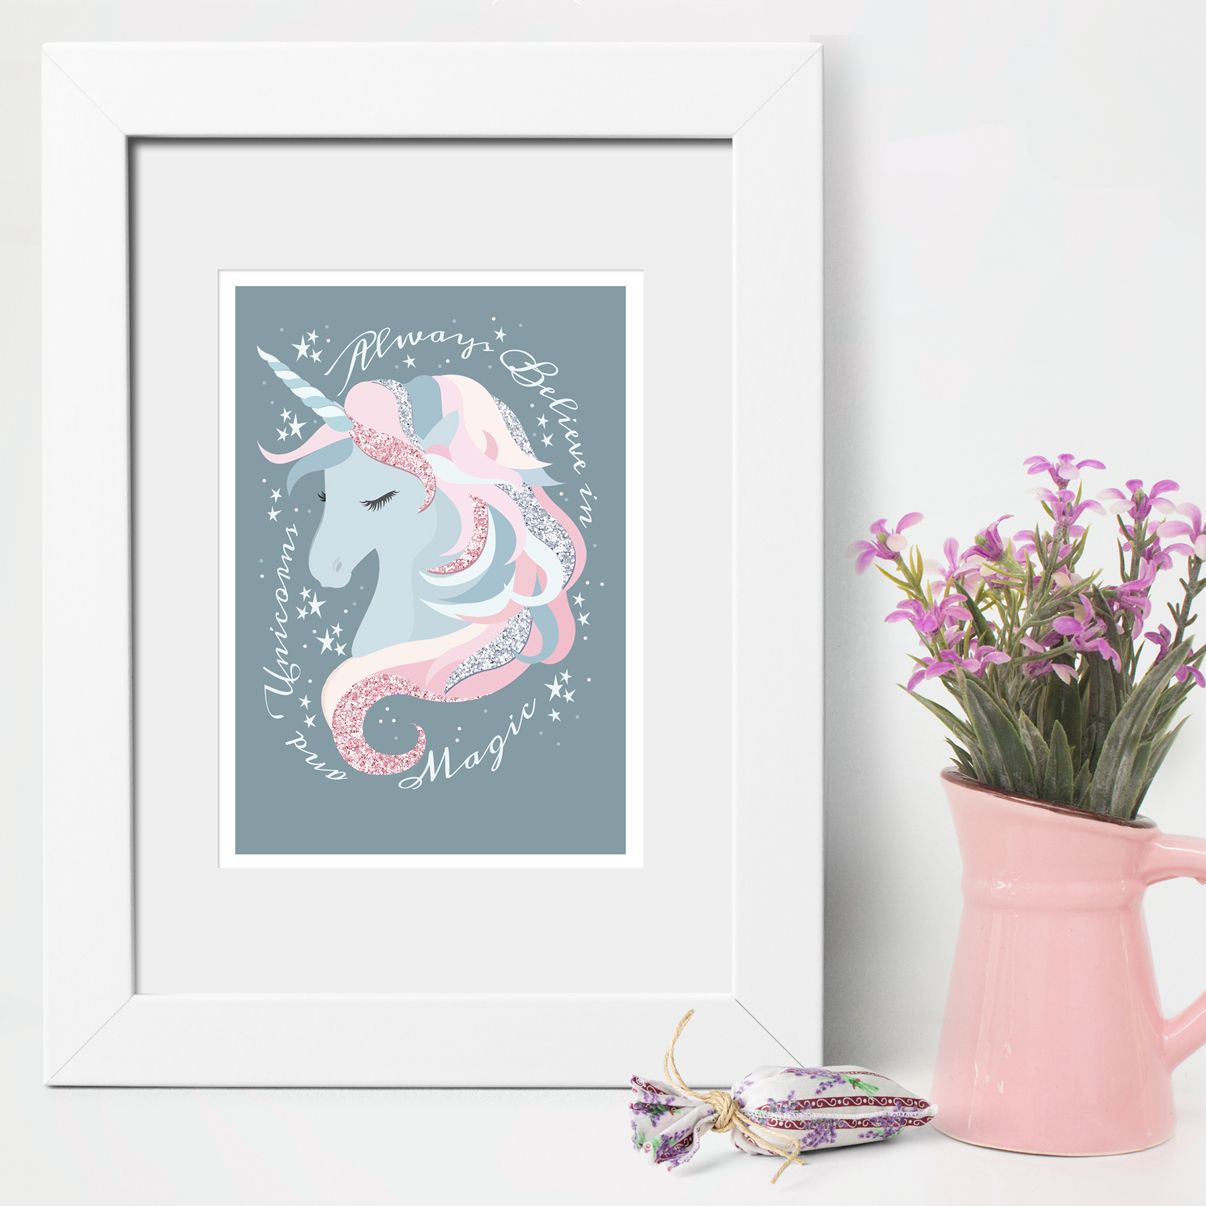 Believe in Unicorns art print | made to order wall art from PhotoFairytales